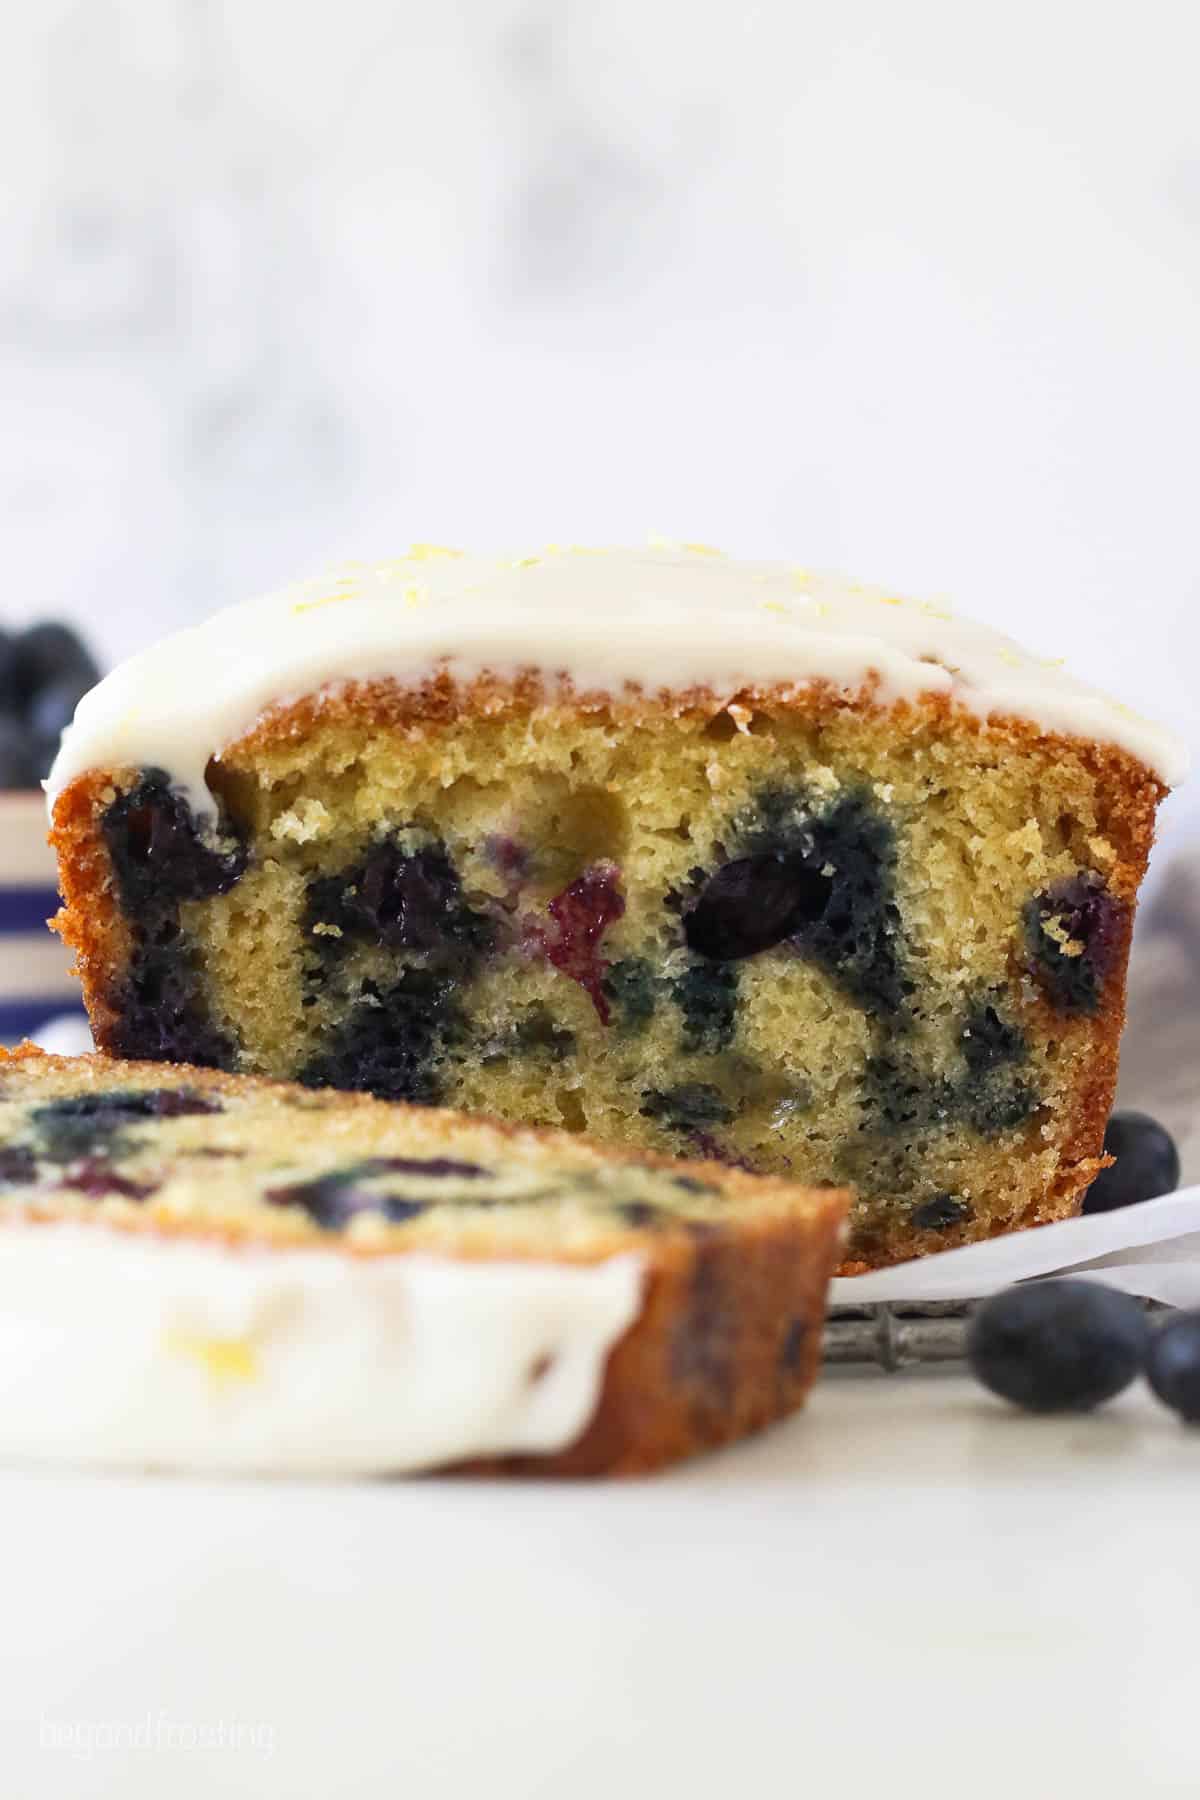 A loaf of blueberry bread slice in half to show the inside